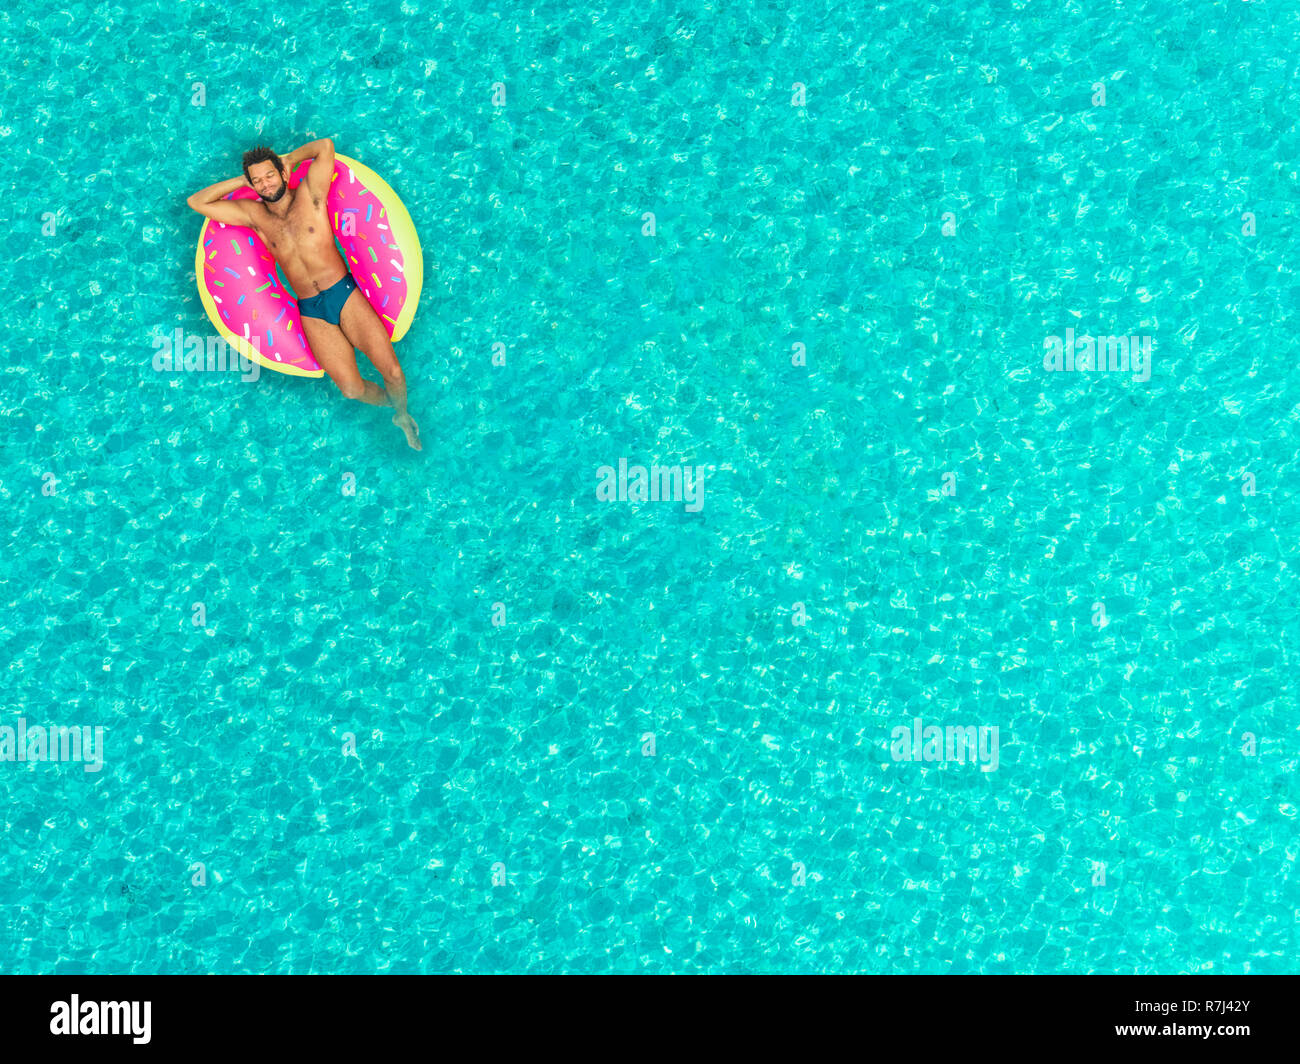 Aerial view of man floating on inflatable donut mattress, relaxing and smiling. Stock Photo